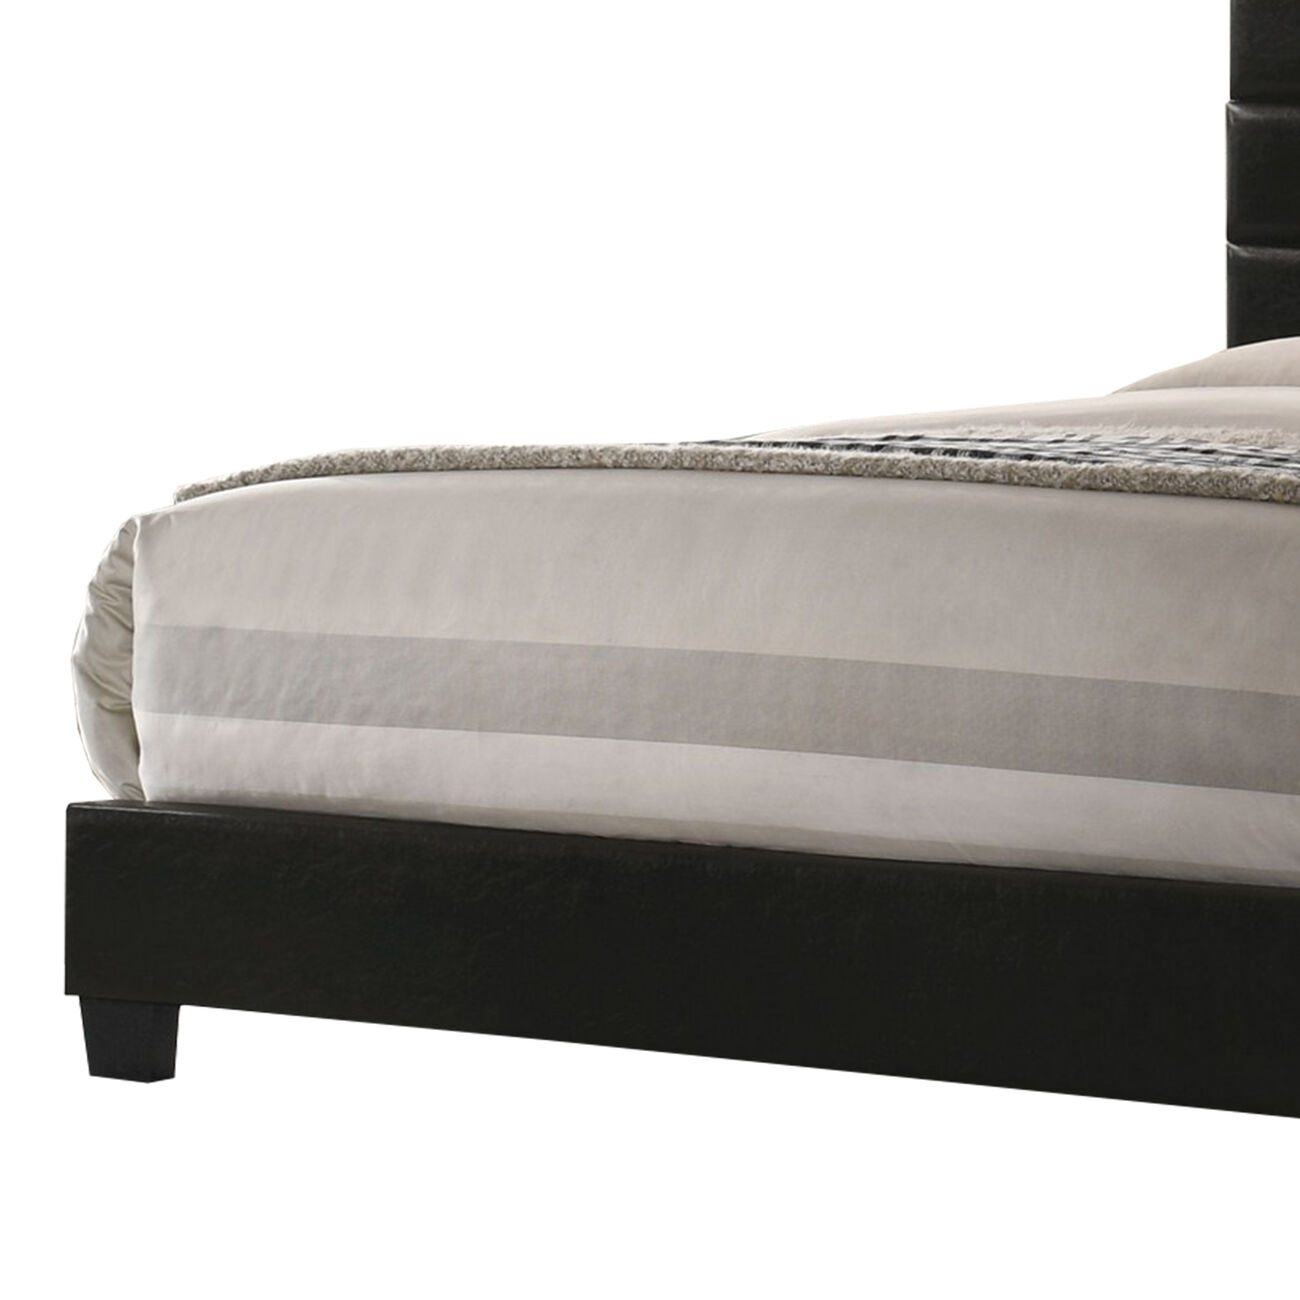 Leatherette Upholstered Queen Bed with Panel Headboard, Black - BM229065